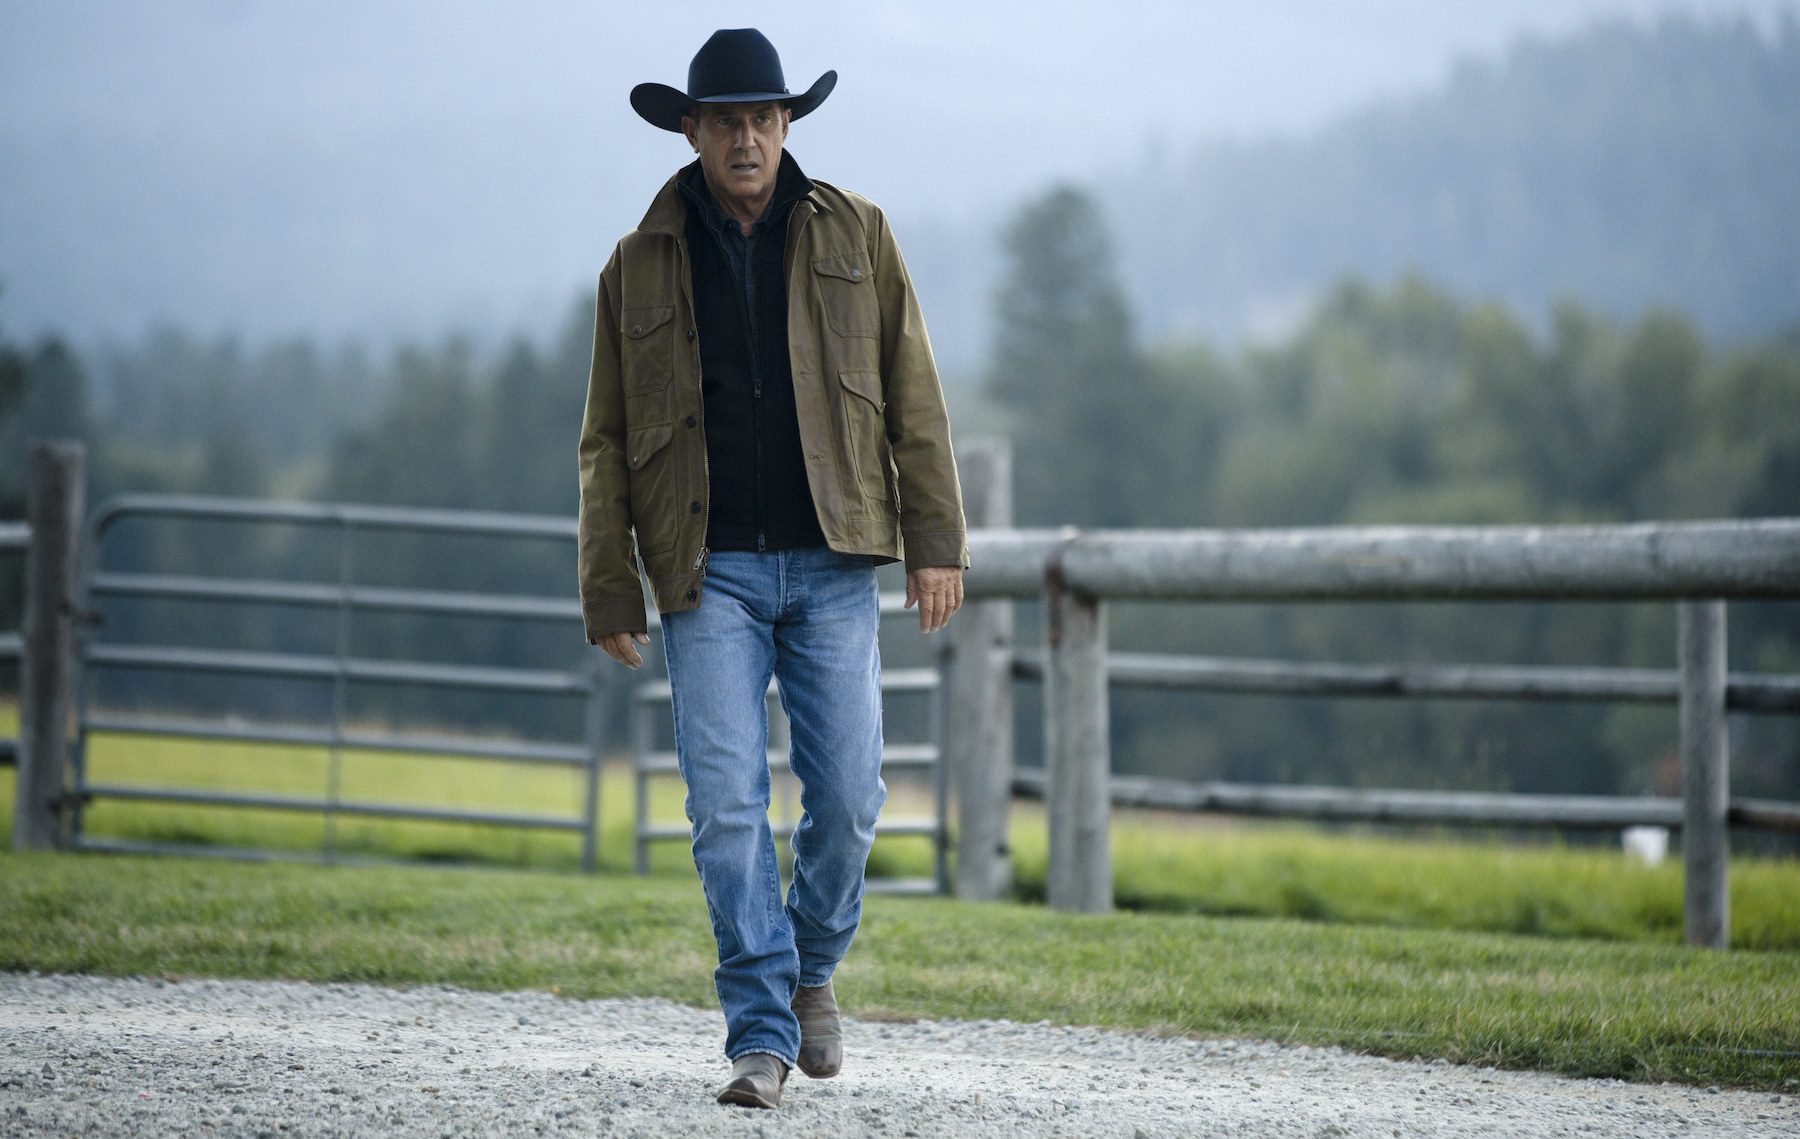 A man in cowboy attire walks around the grounds of his ranch alone